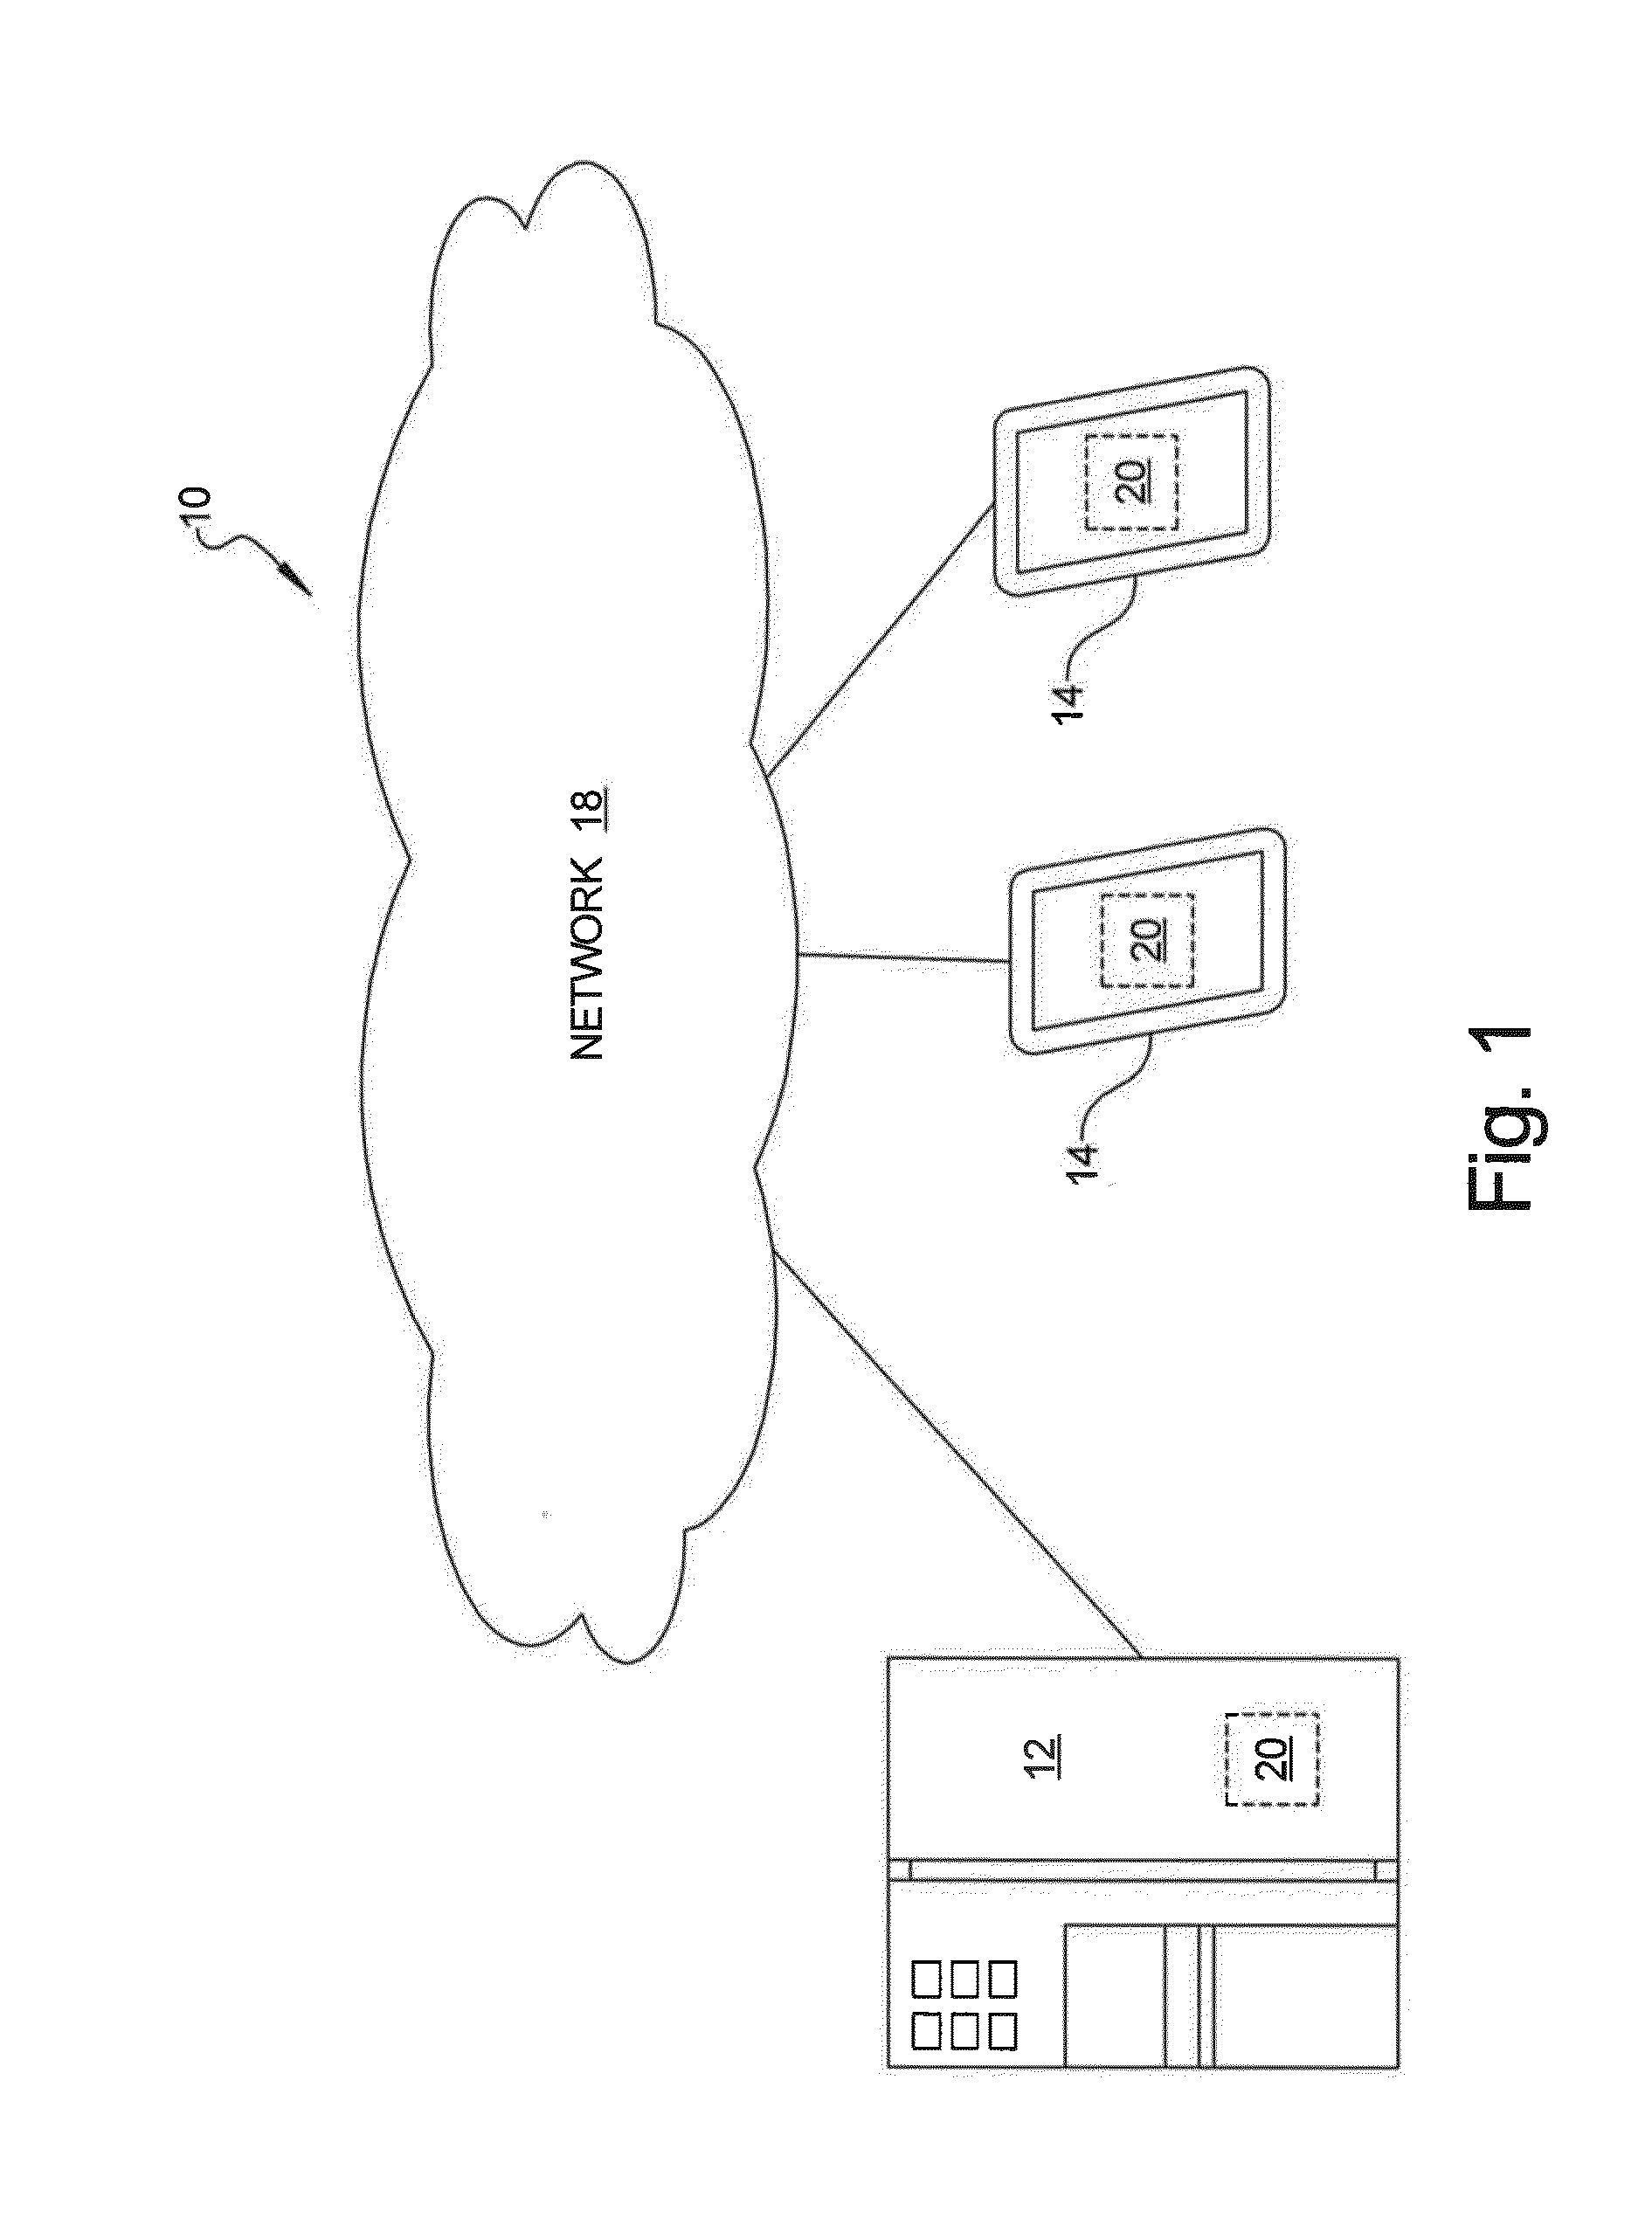 System for optimizing sponsored product listings for seller performance in an e-commerce marketplace and method of using same